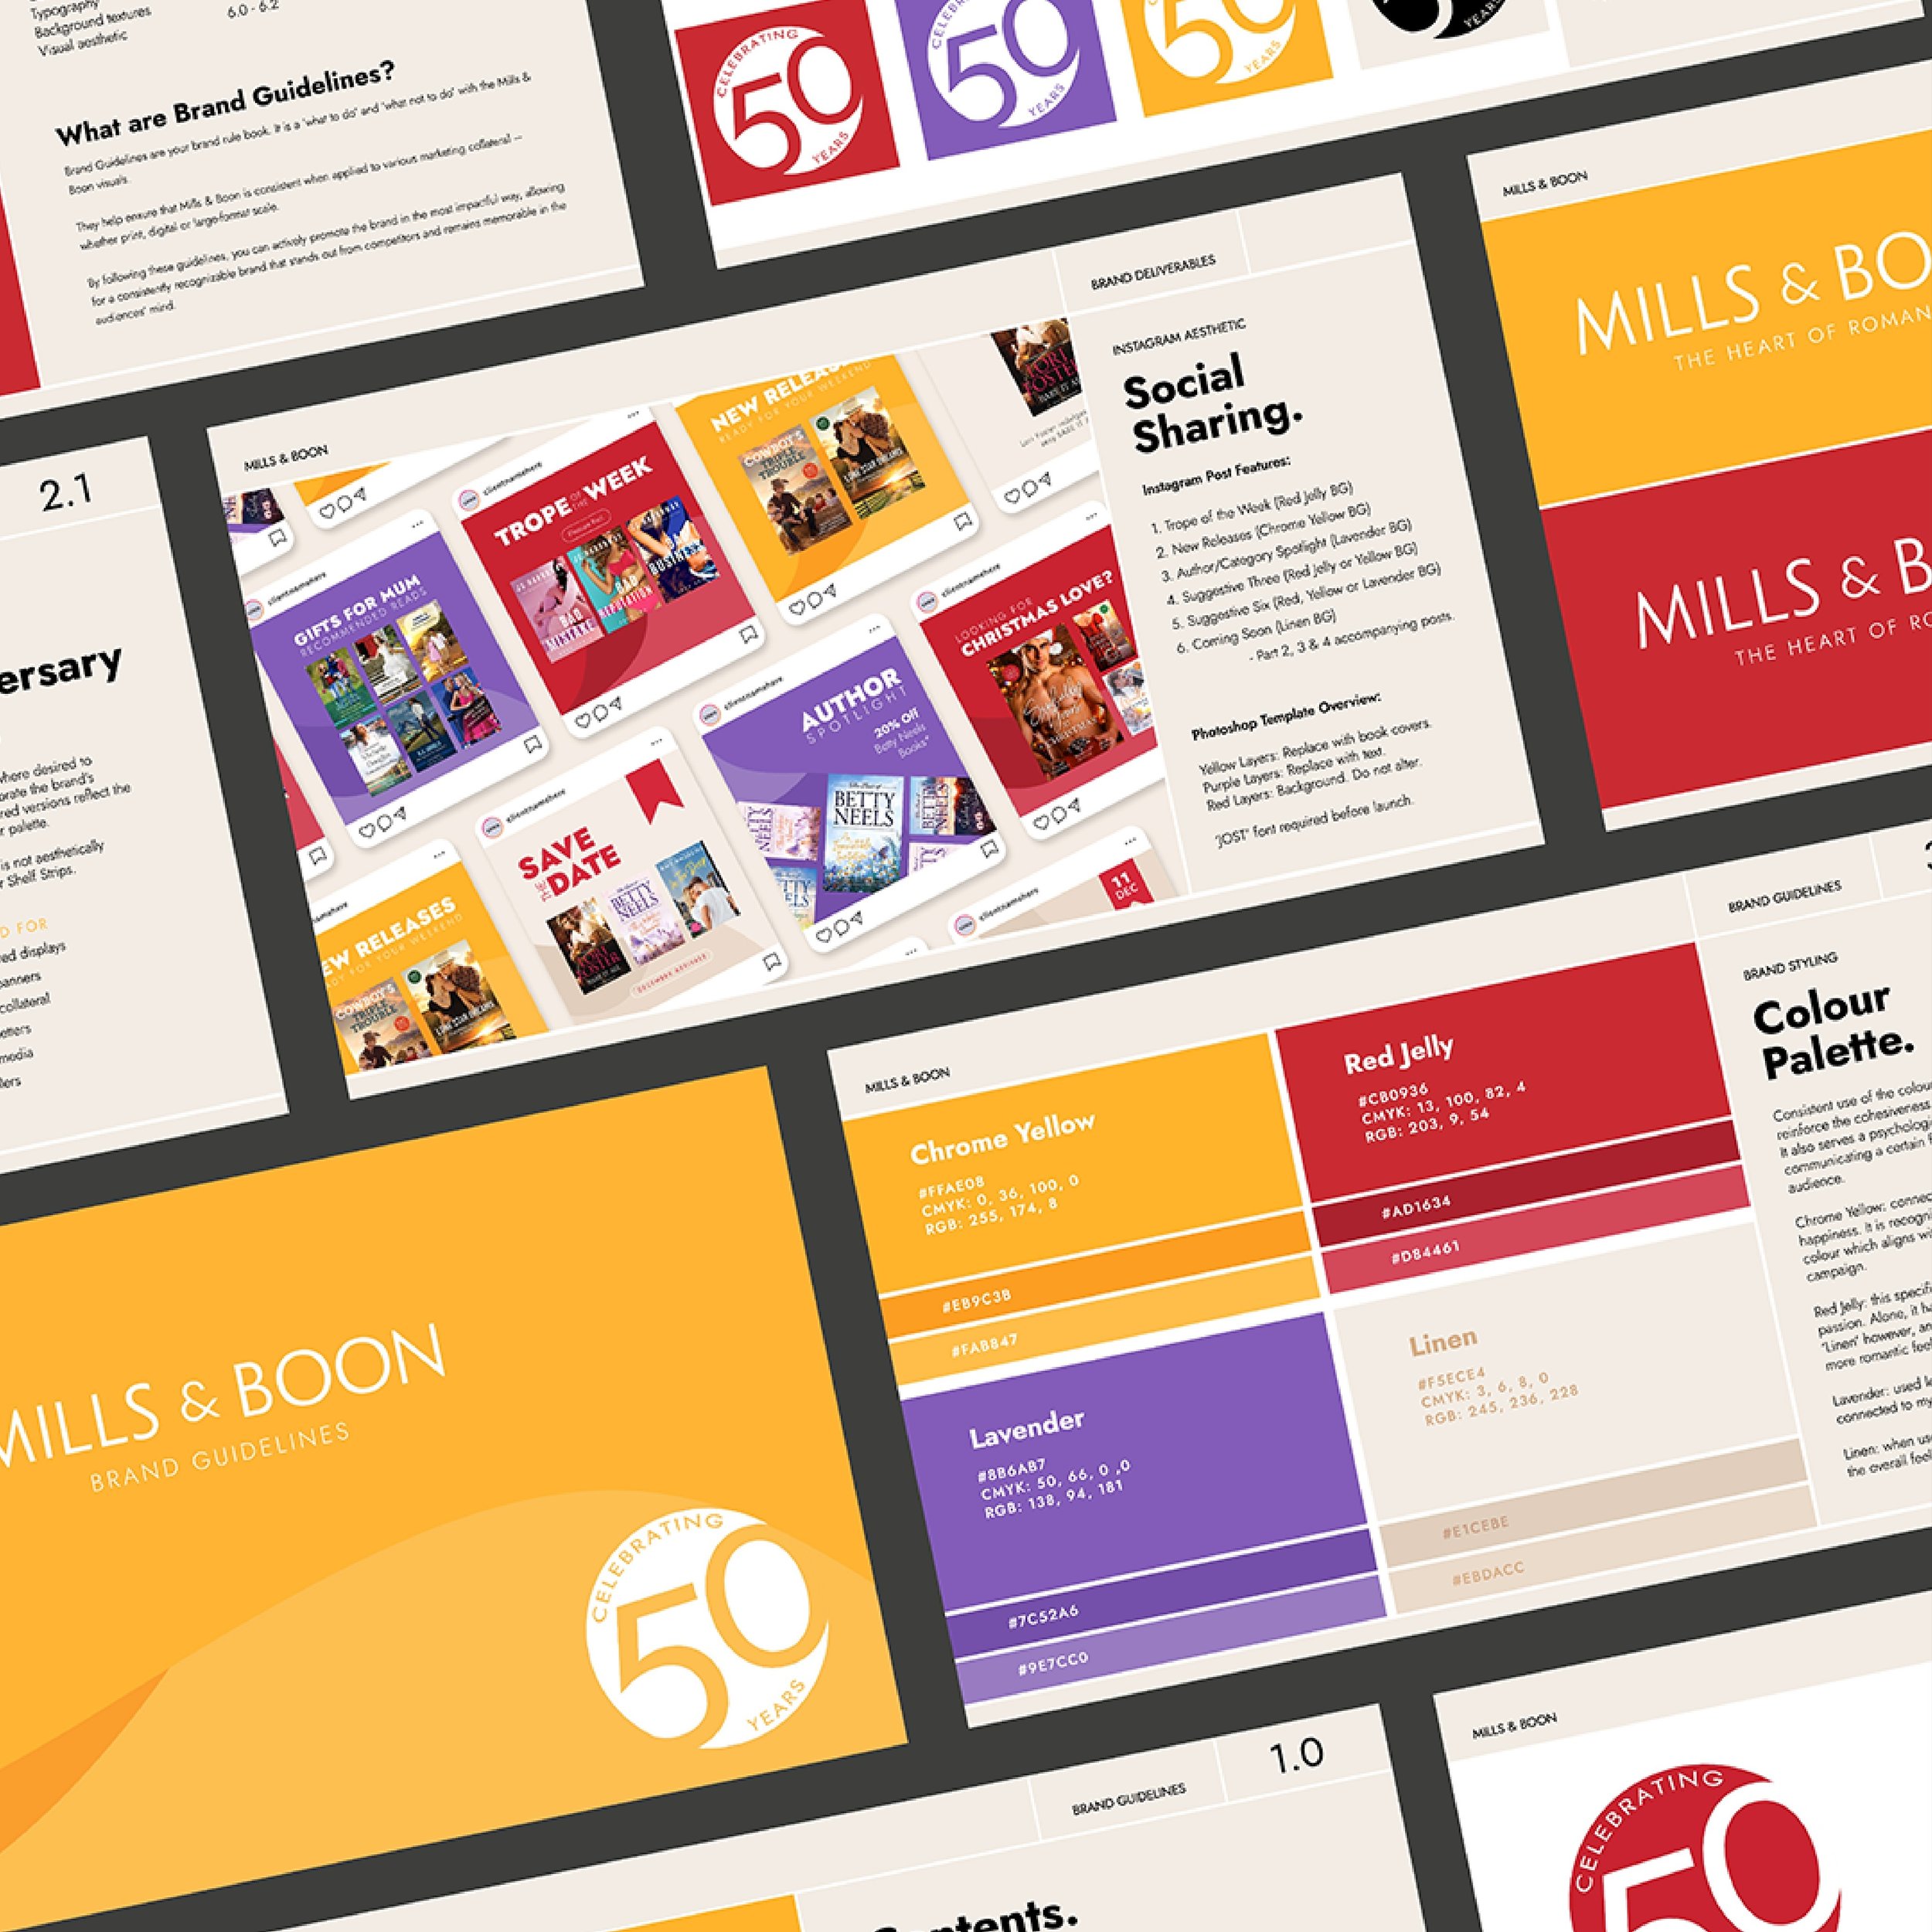 A look at the brand guidelines for the Mills &amp; Boon!

#branding #graphicdesign